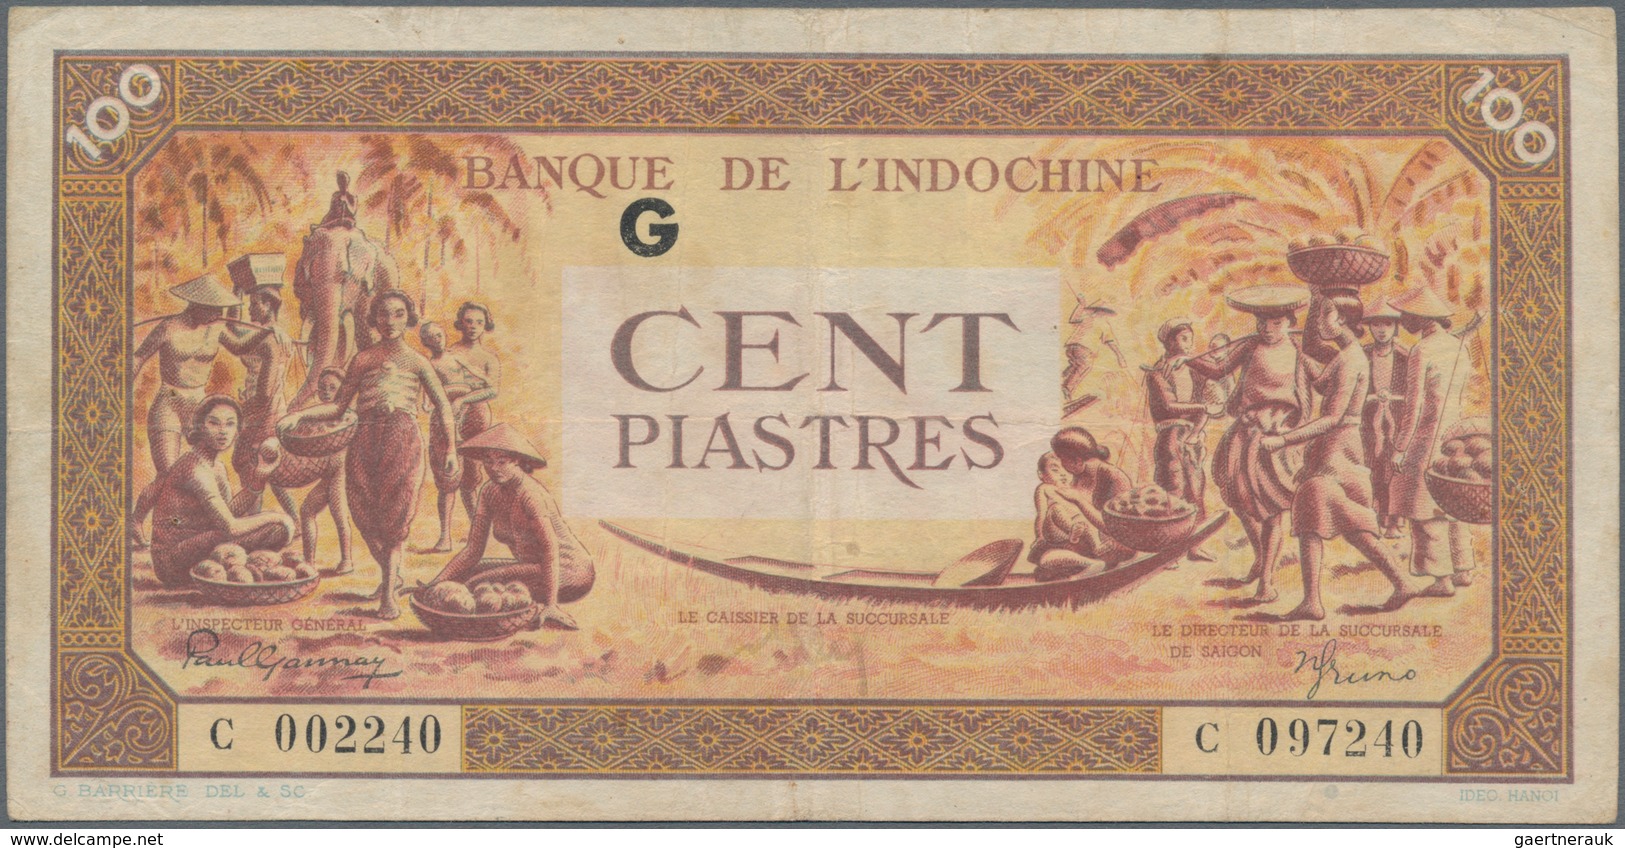 French Indochina / Französisch Indochina: Banque de l'Indo-Chine, very nice lot with 17 banknotes of